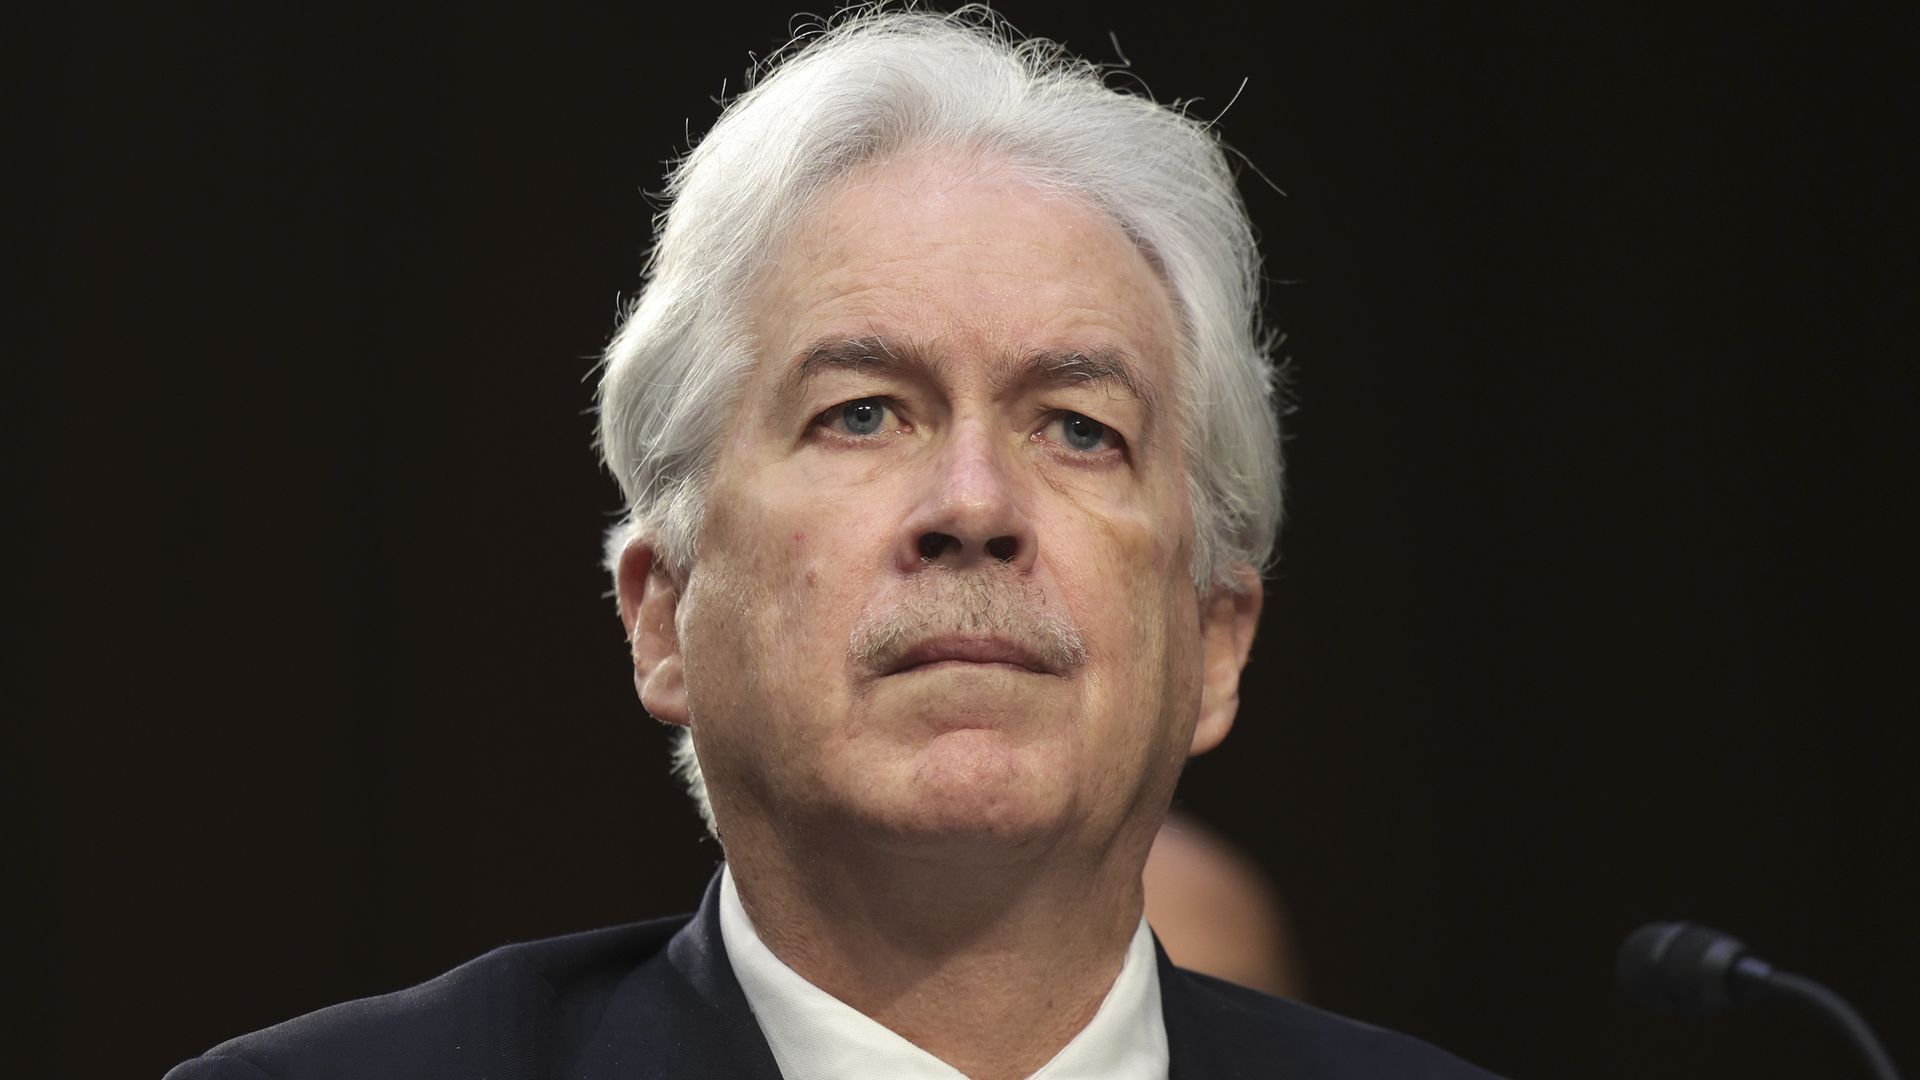 CIA director William Burns testifies before the Senate Intelligence Committee on March 10, 2022. Photo: Kevin Dietsch/Getty Images